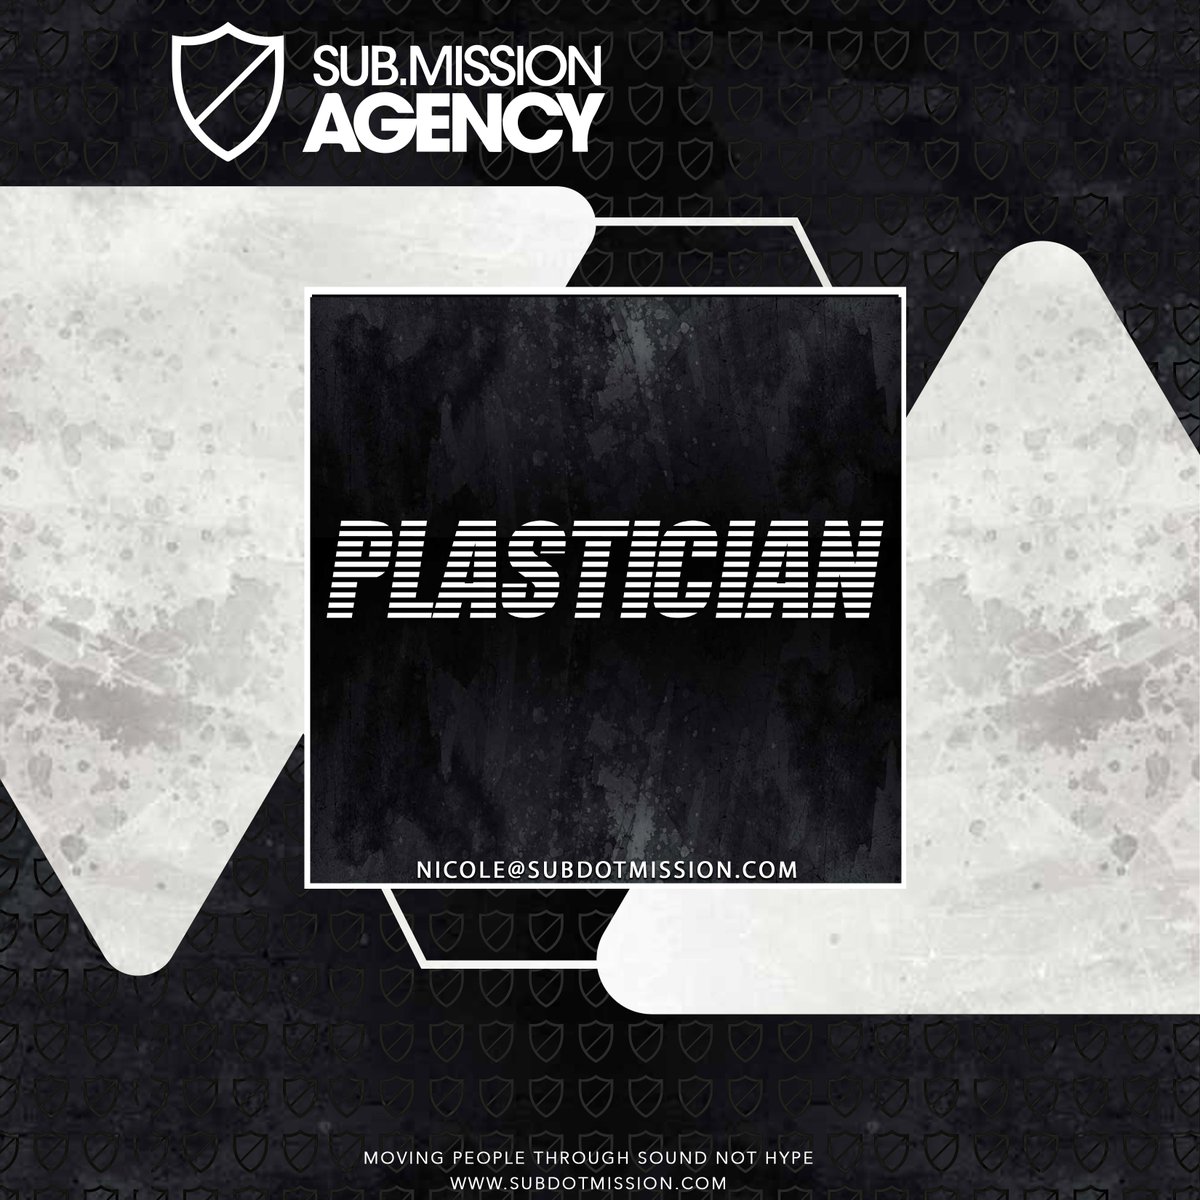 AGENCY ANNOUNCEMENT Please join us in welcoming @Plastician to the Sub.mission agency! Contact Nicole for all North American bookings! -- subdotmission.com/?profile=plast…